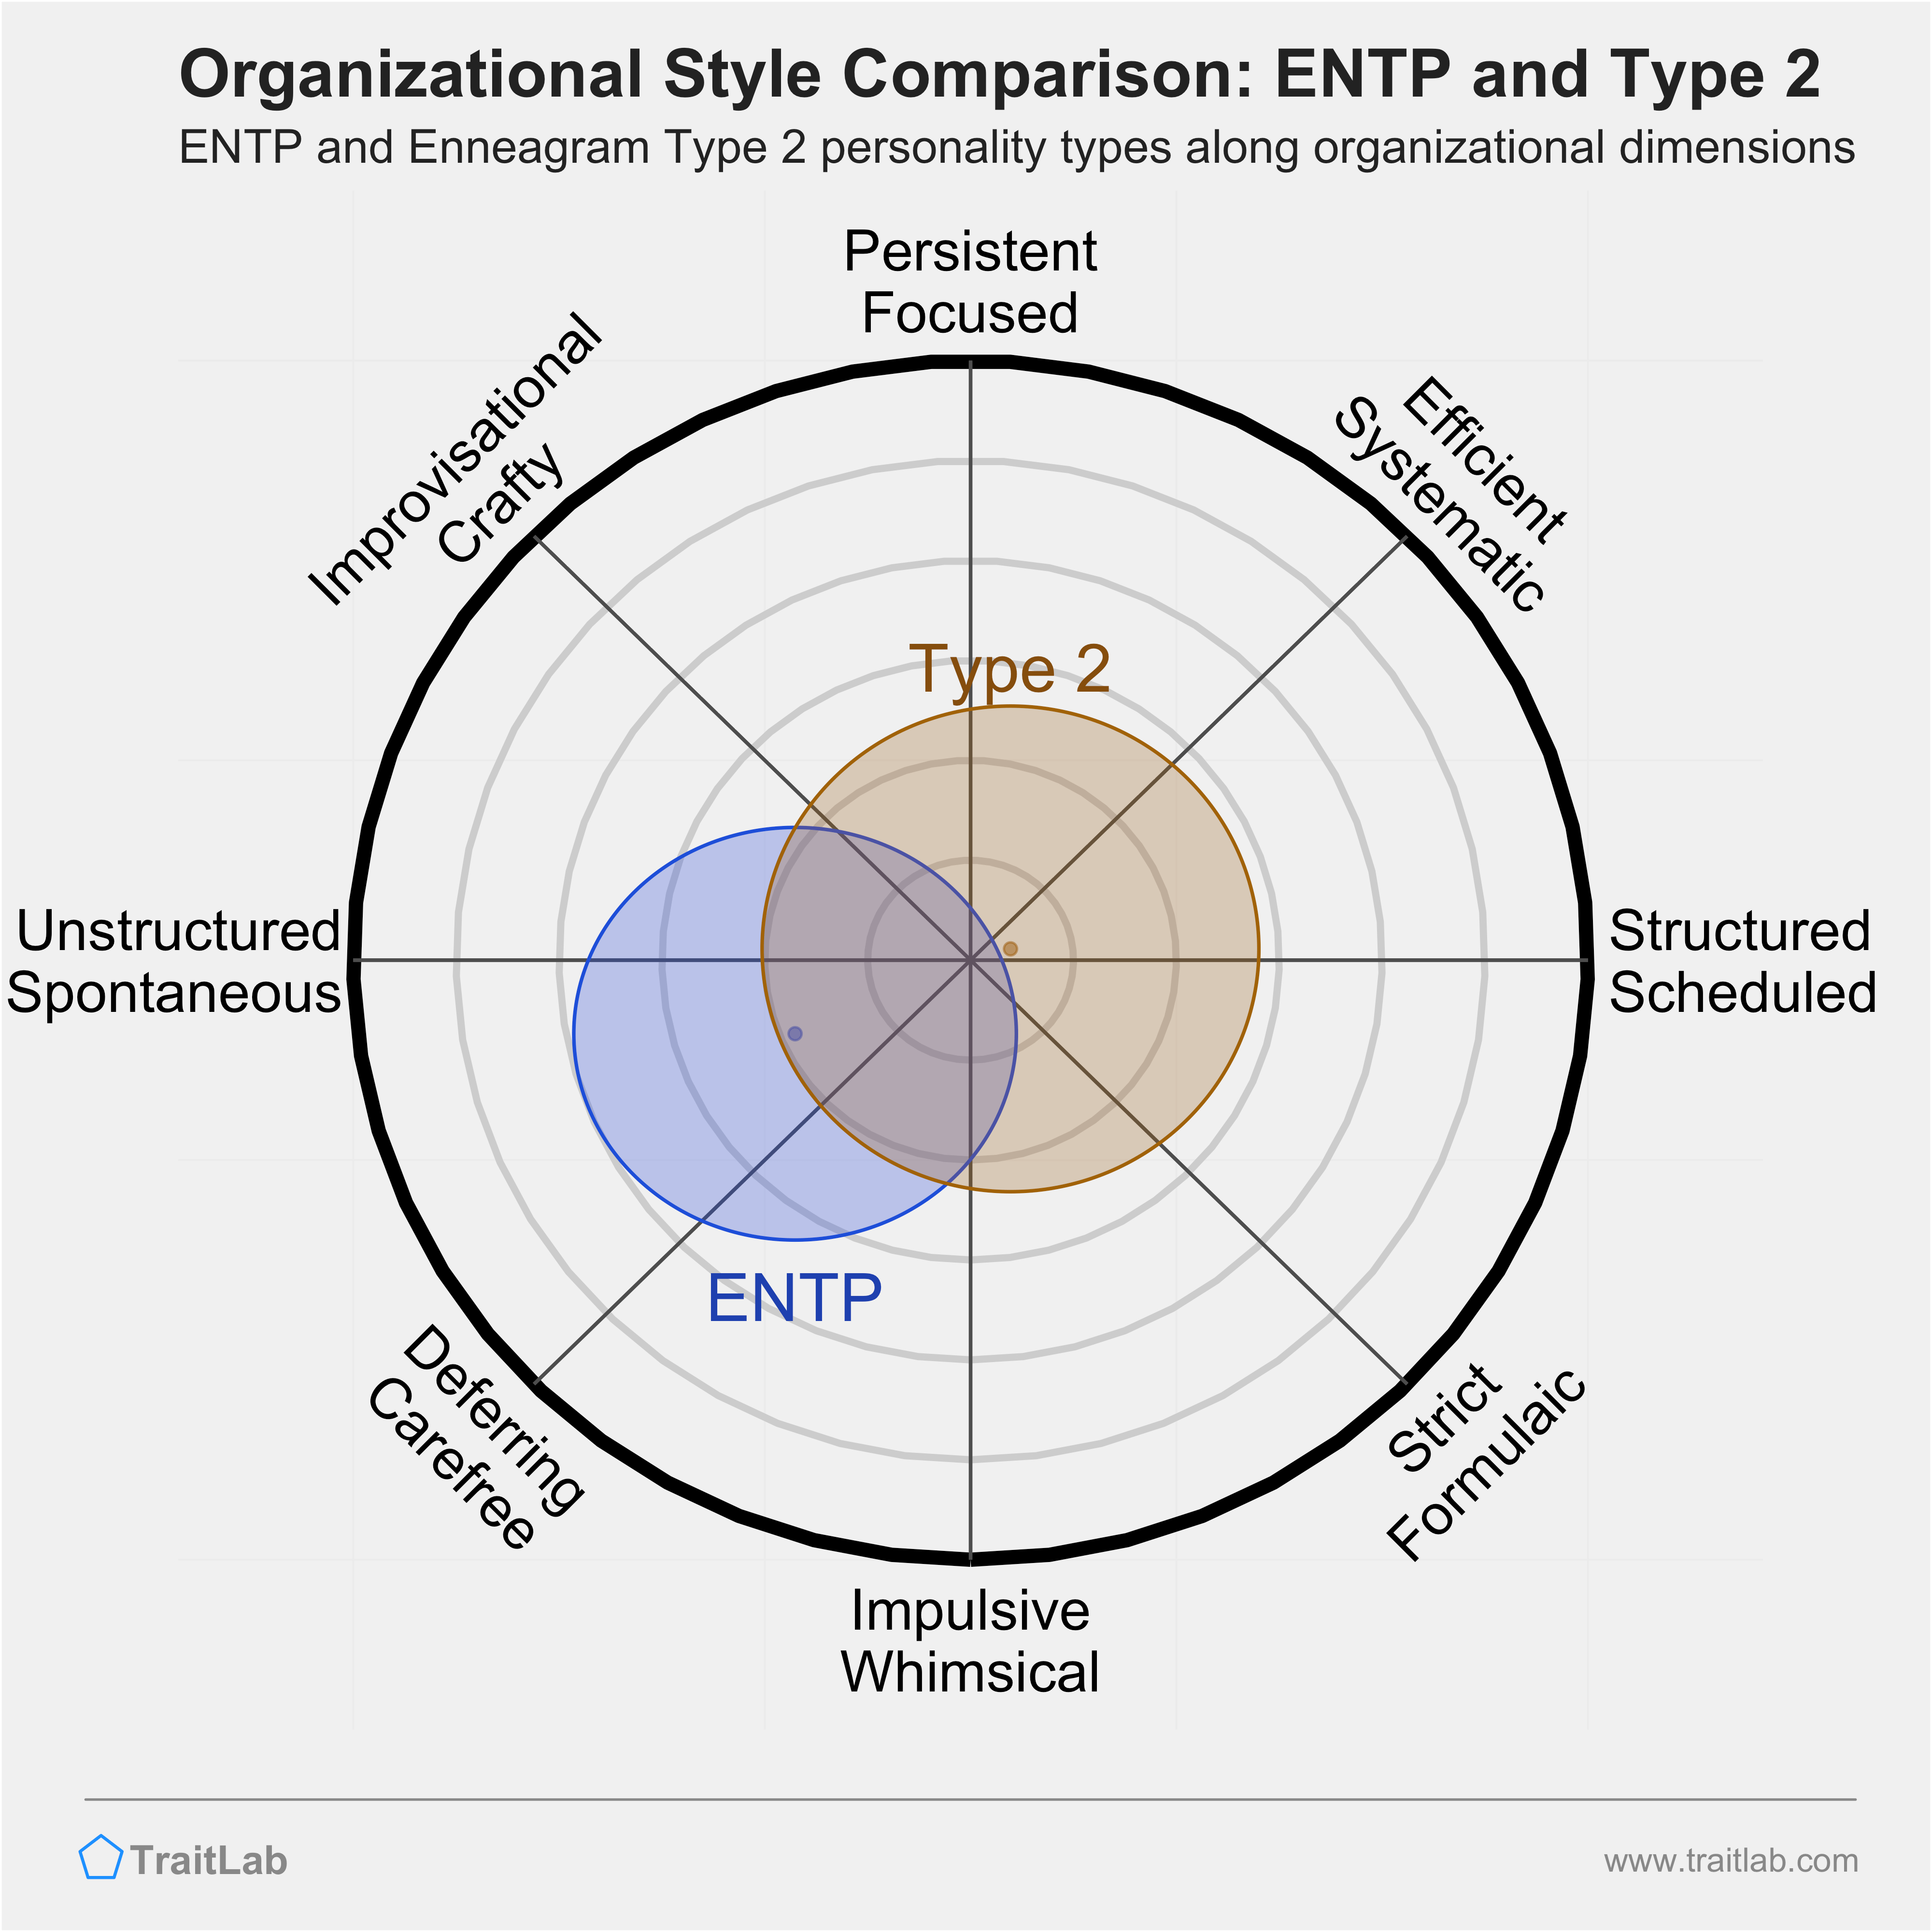 ENTP and Type 2 comparison across organizational dimensions